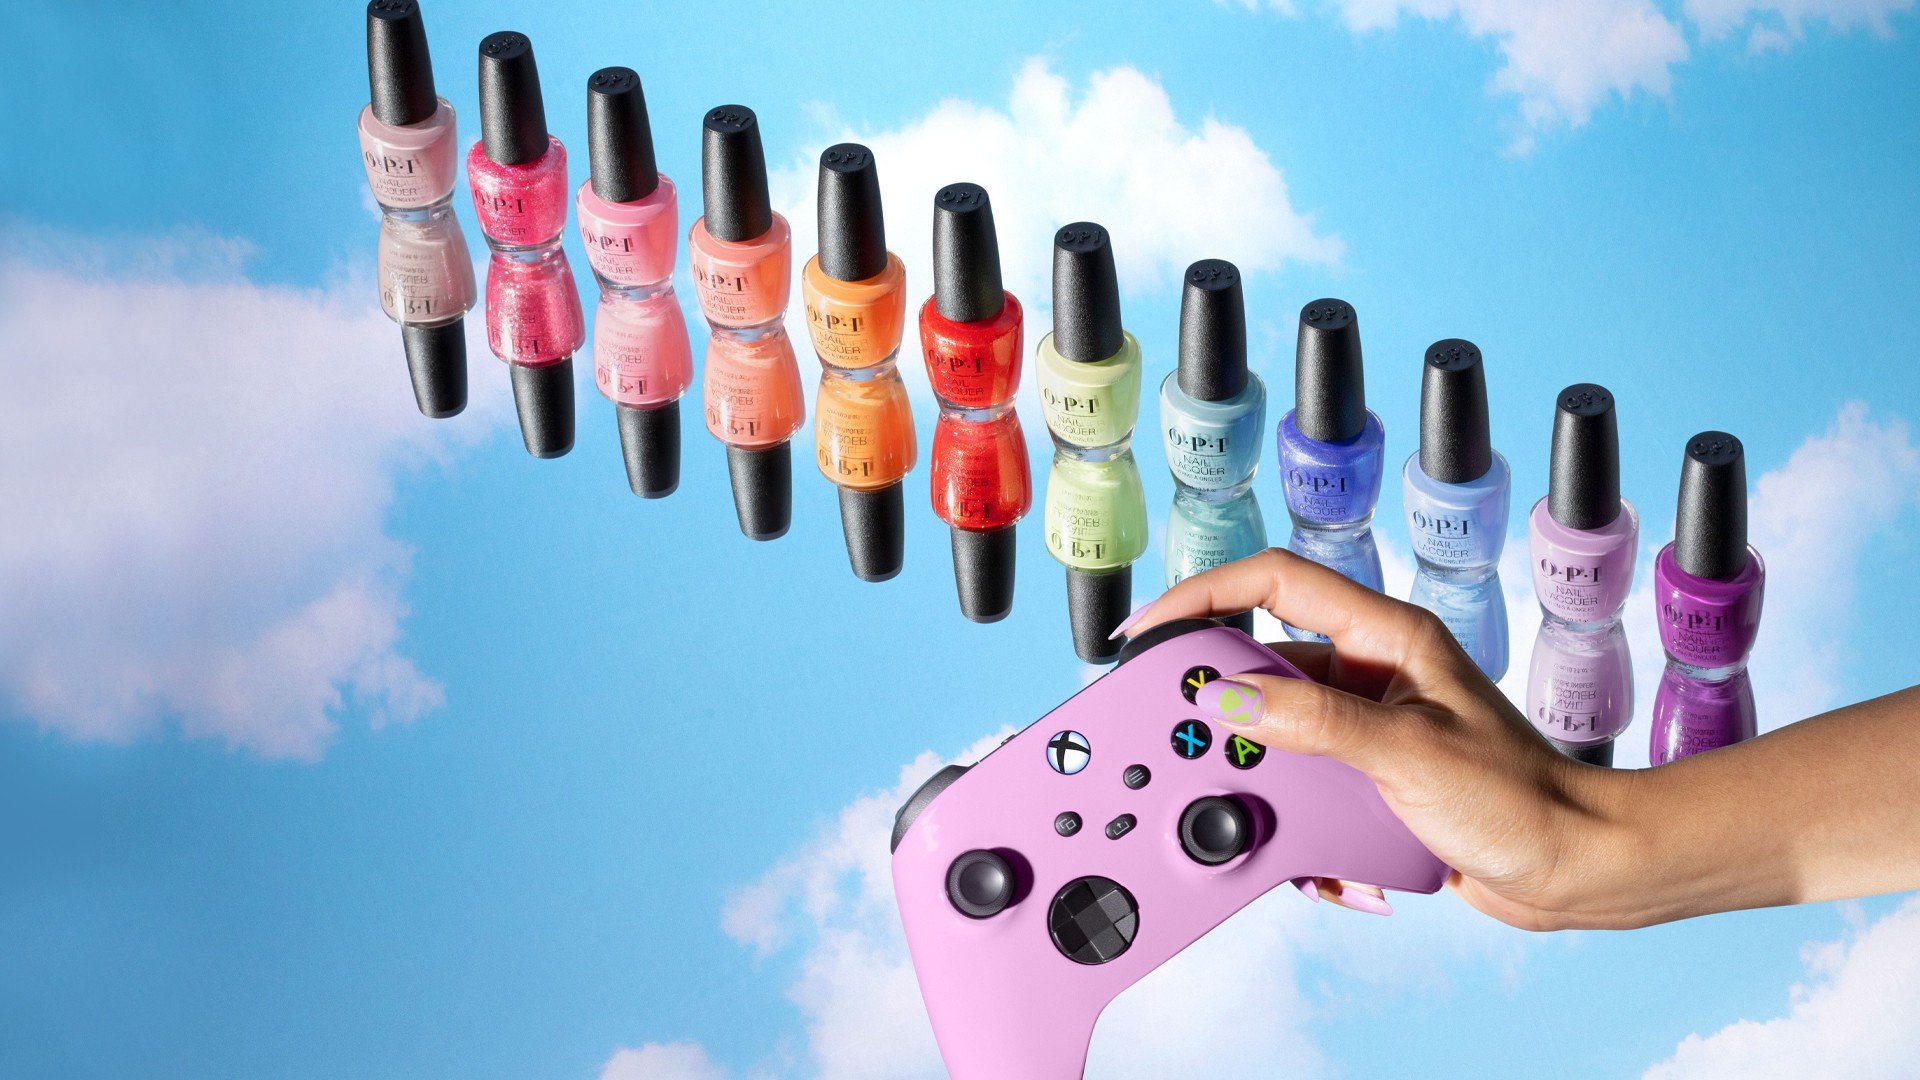 Xbox has partnered with OPI for a nail polish set, DLC and custom